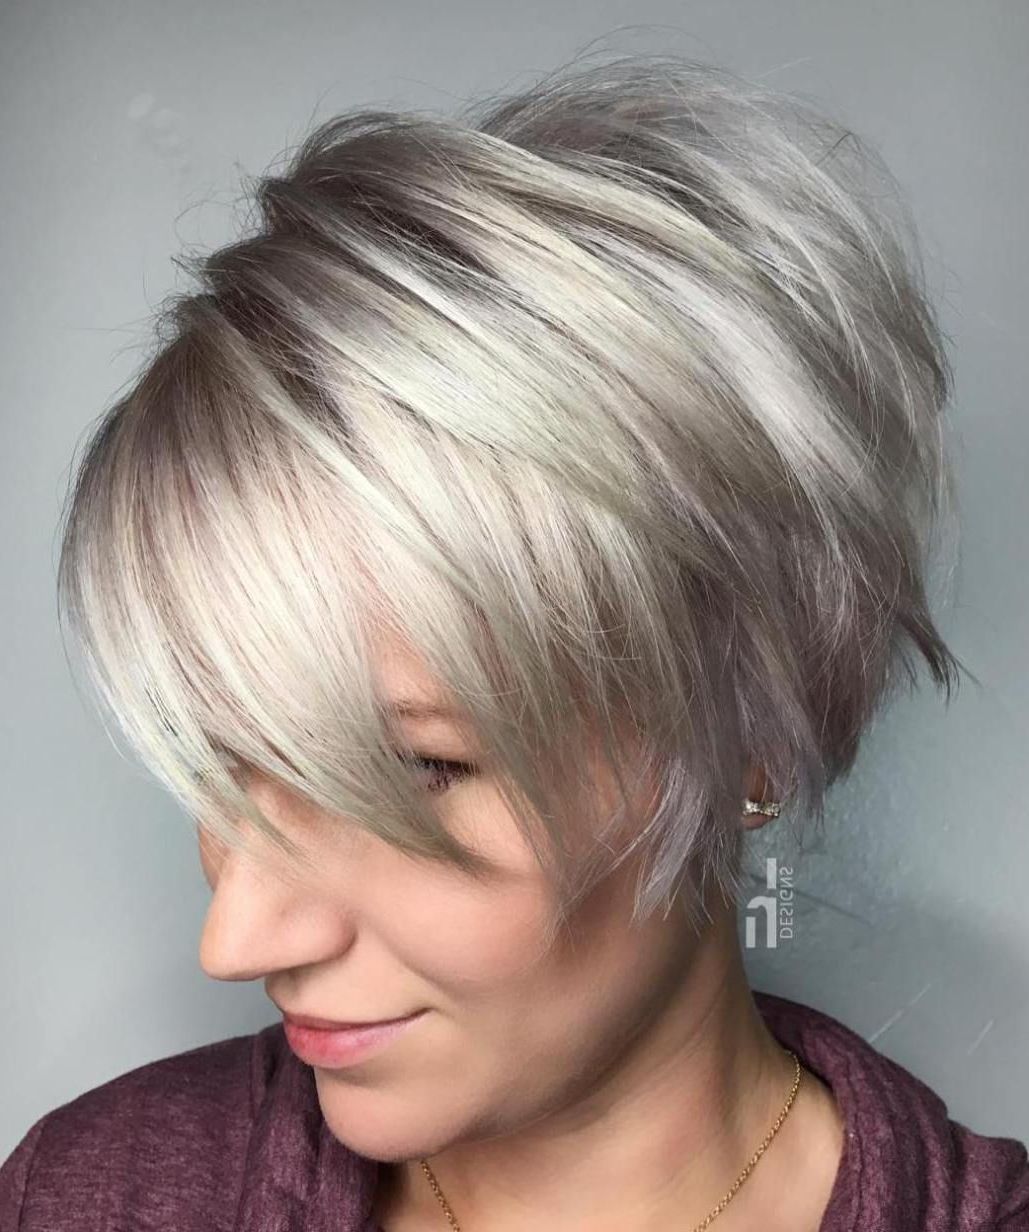 10 Best Hairstyles For Older Women Over 50 Throughout Salt And Pepper Voluminous Haircuts (Gallery 19 of 20)